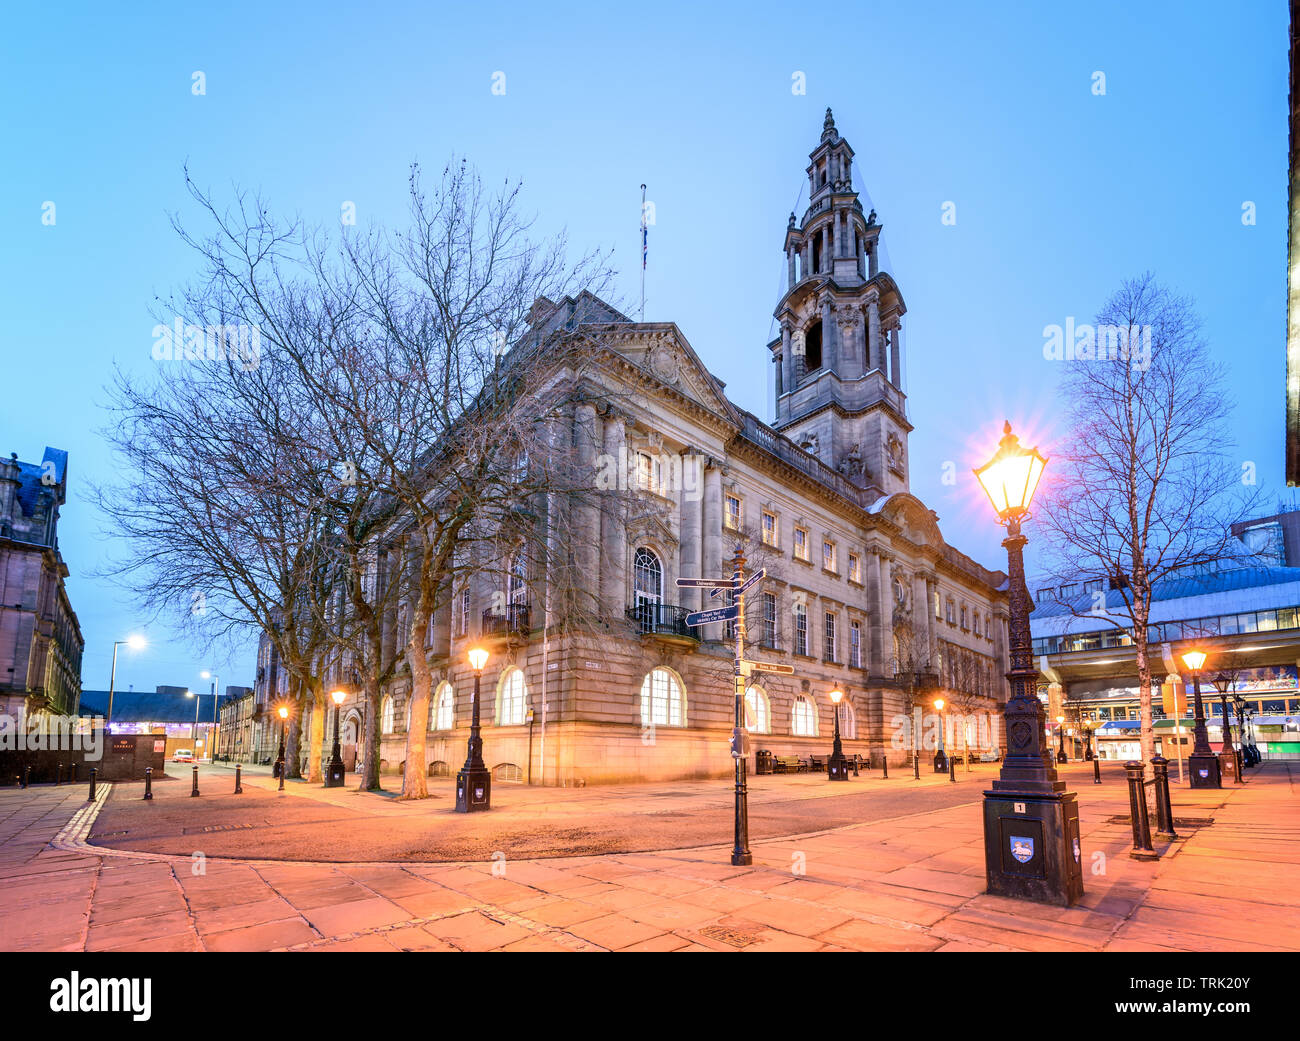 The tower makes Sessions House one of the tallest buildings in Preston rising to 54.7 metres (179.5 ft). Stock Photo